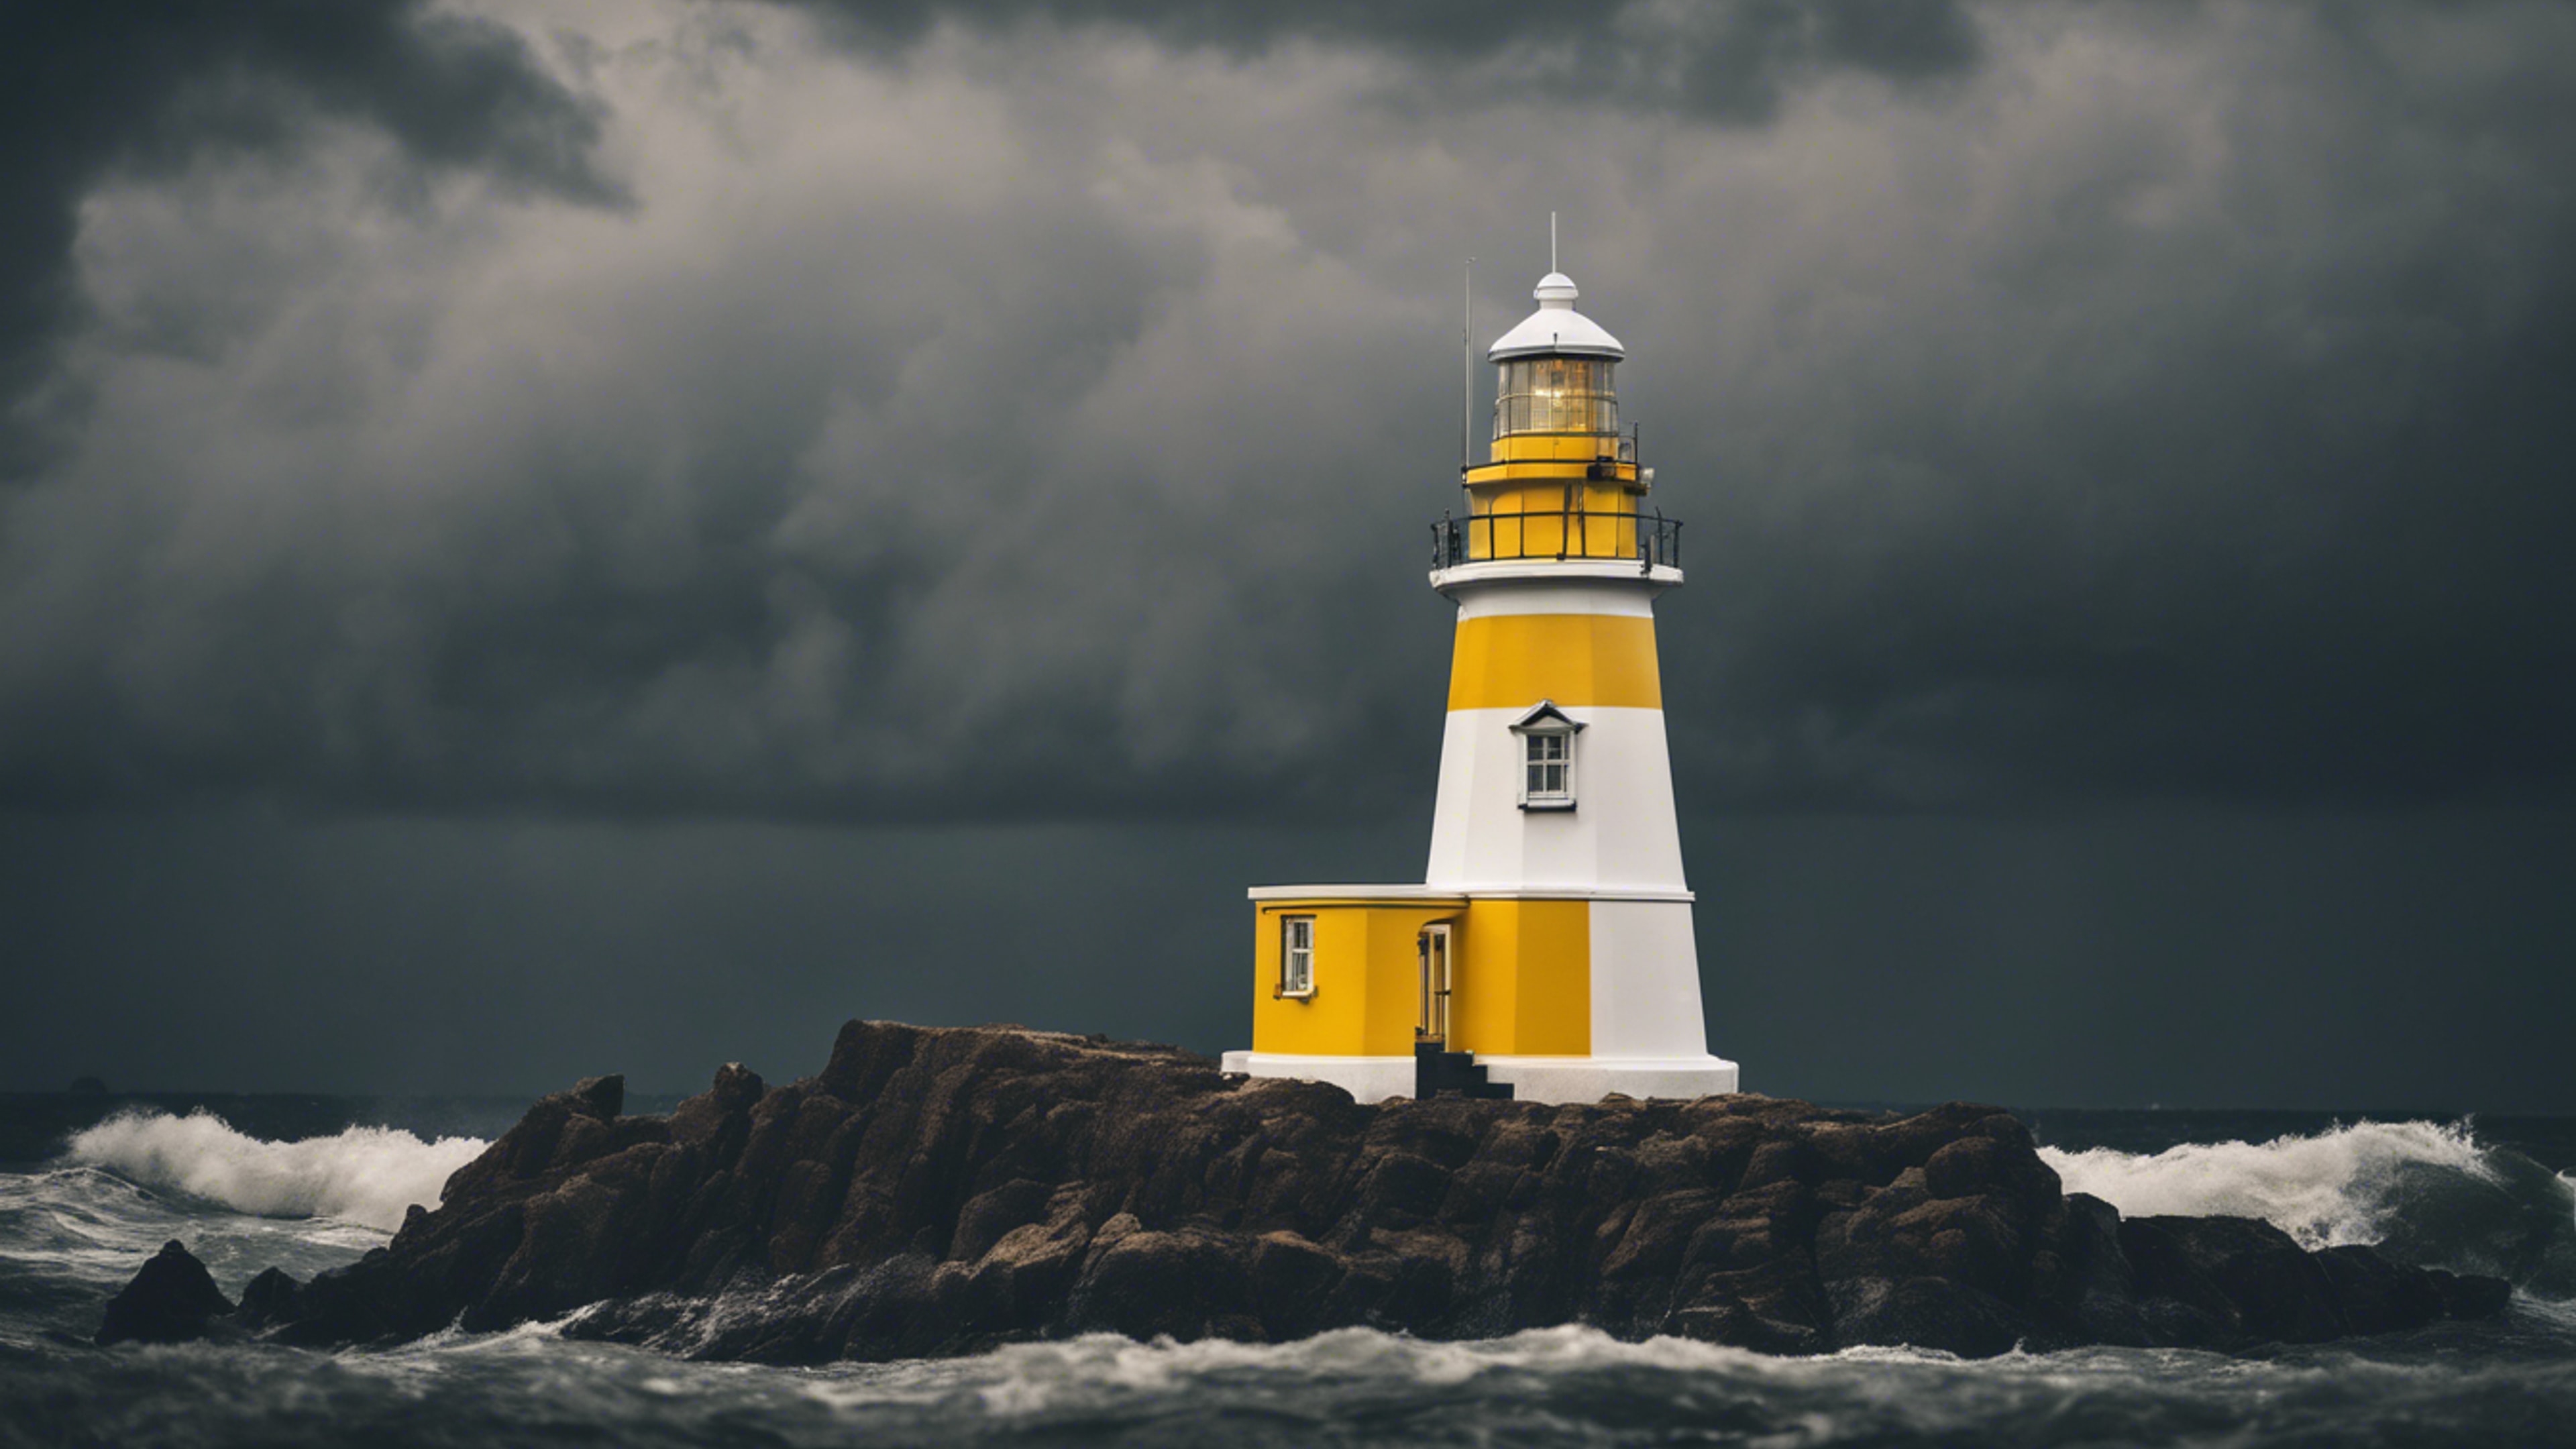 A white and yellow striped lighthouse standing tall against a stormy dark sky. Tapeta[29fc73b96f634852baf9]